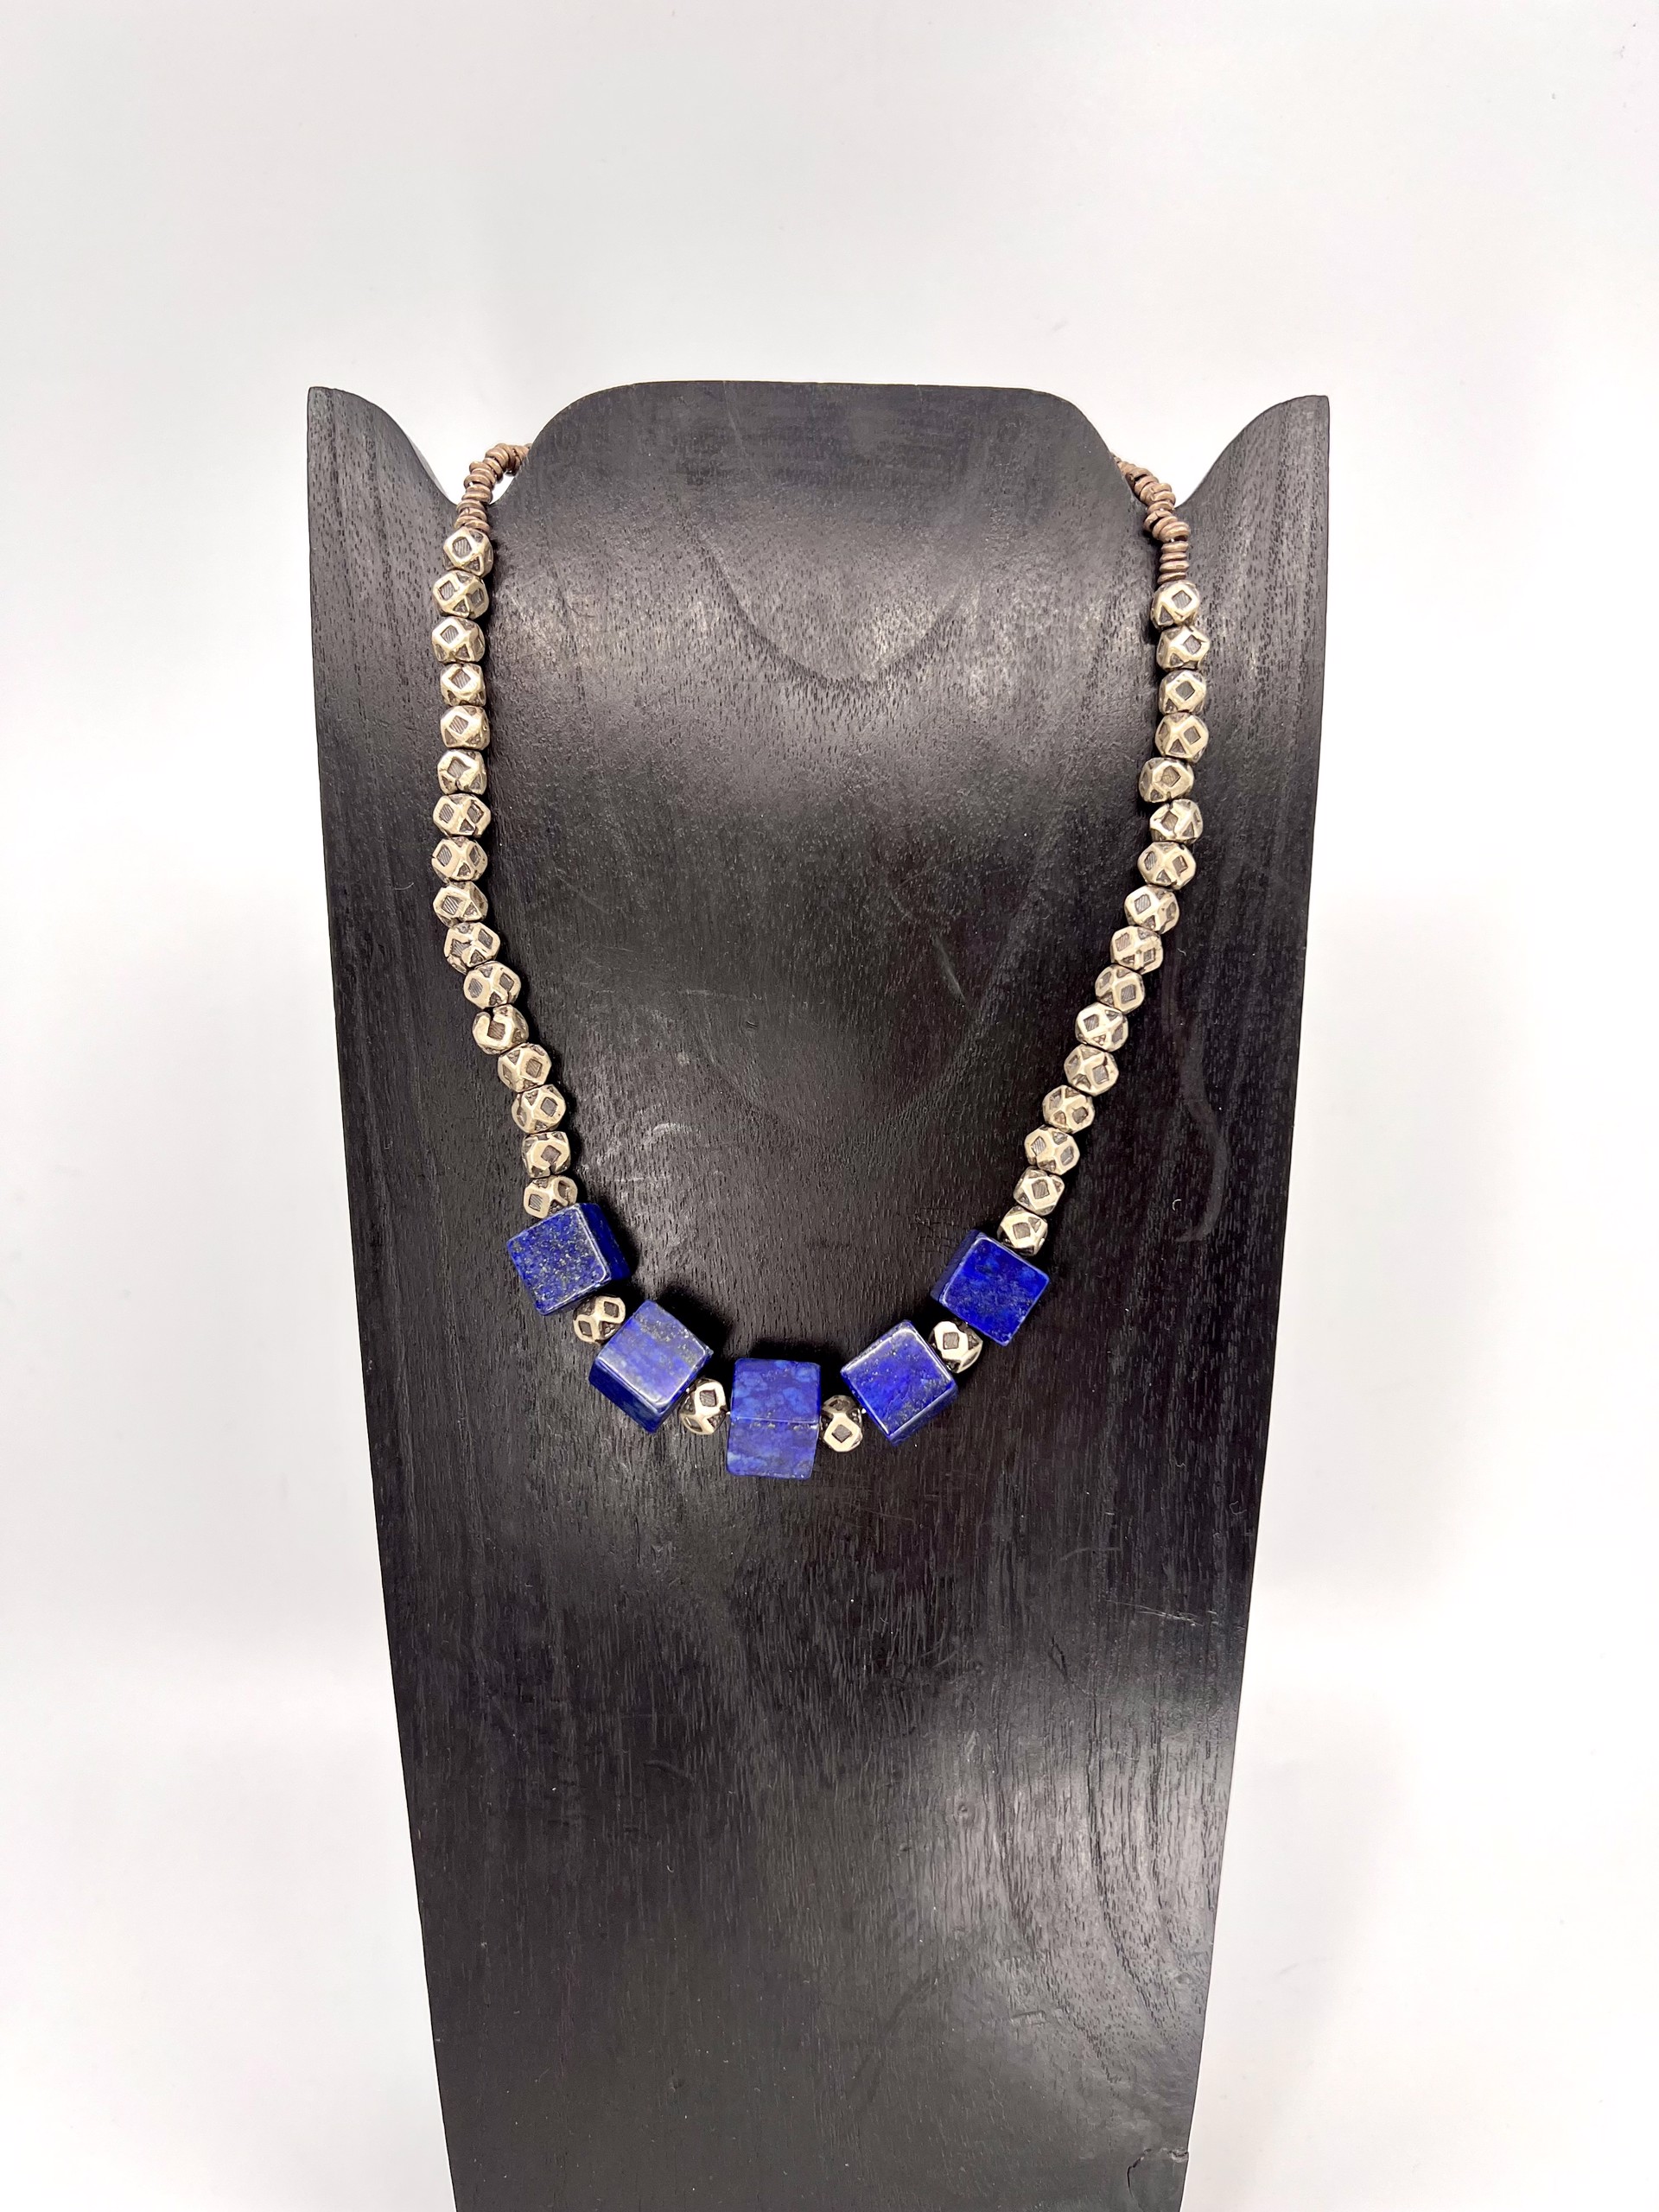 Lapis & Ethiopian Silver Necklace by Gina Caruso